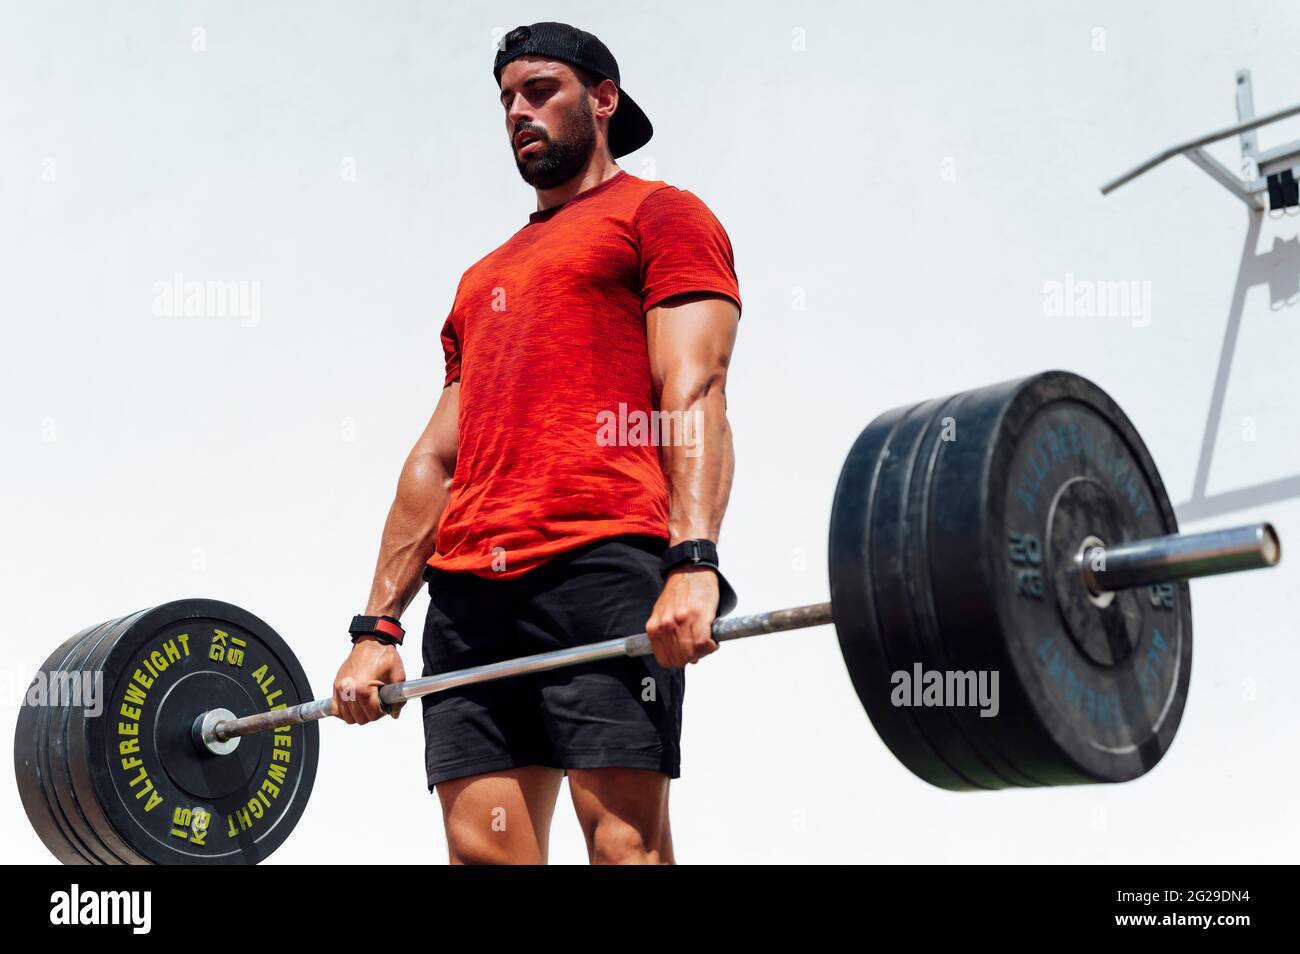 Weightlifting fitness man bodybuilding or powerlifting at outdoor gym. Bodybuilder strength training lifting barbell weights doing deadlift exercise. Stock Photo